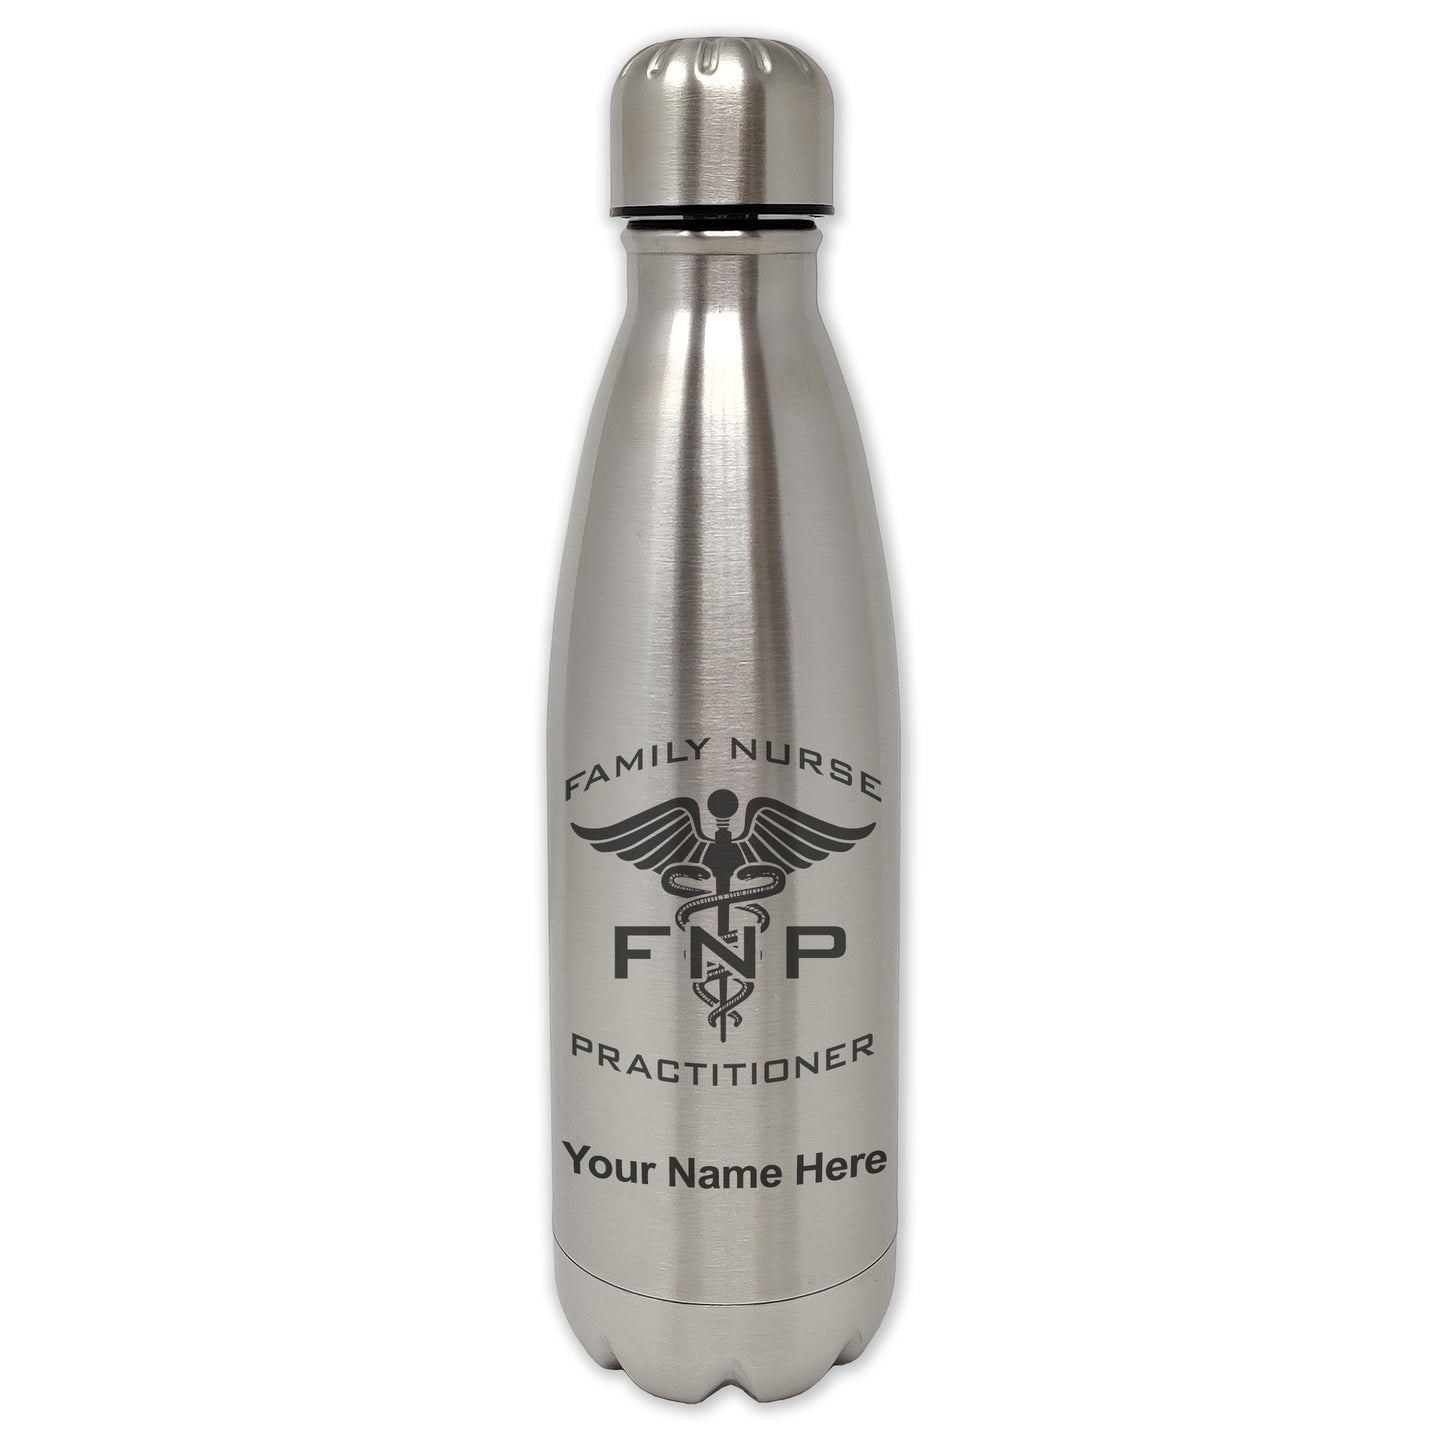 LaserGram Single Wall Water Bottle, FNP Family Nurse Practitioner, Personalized Engraving Included